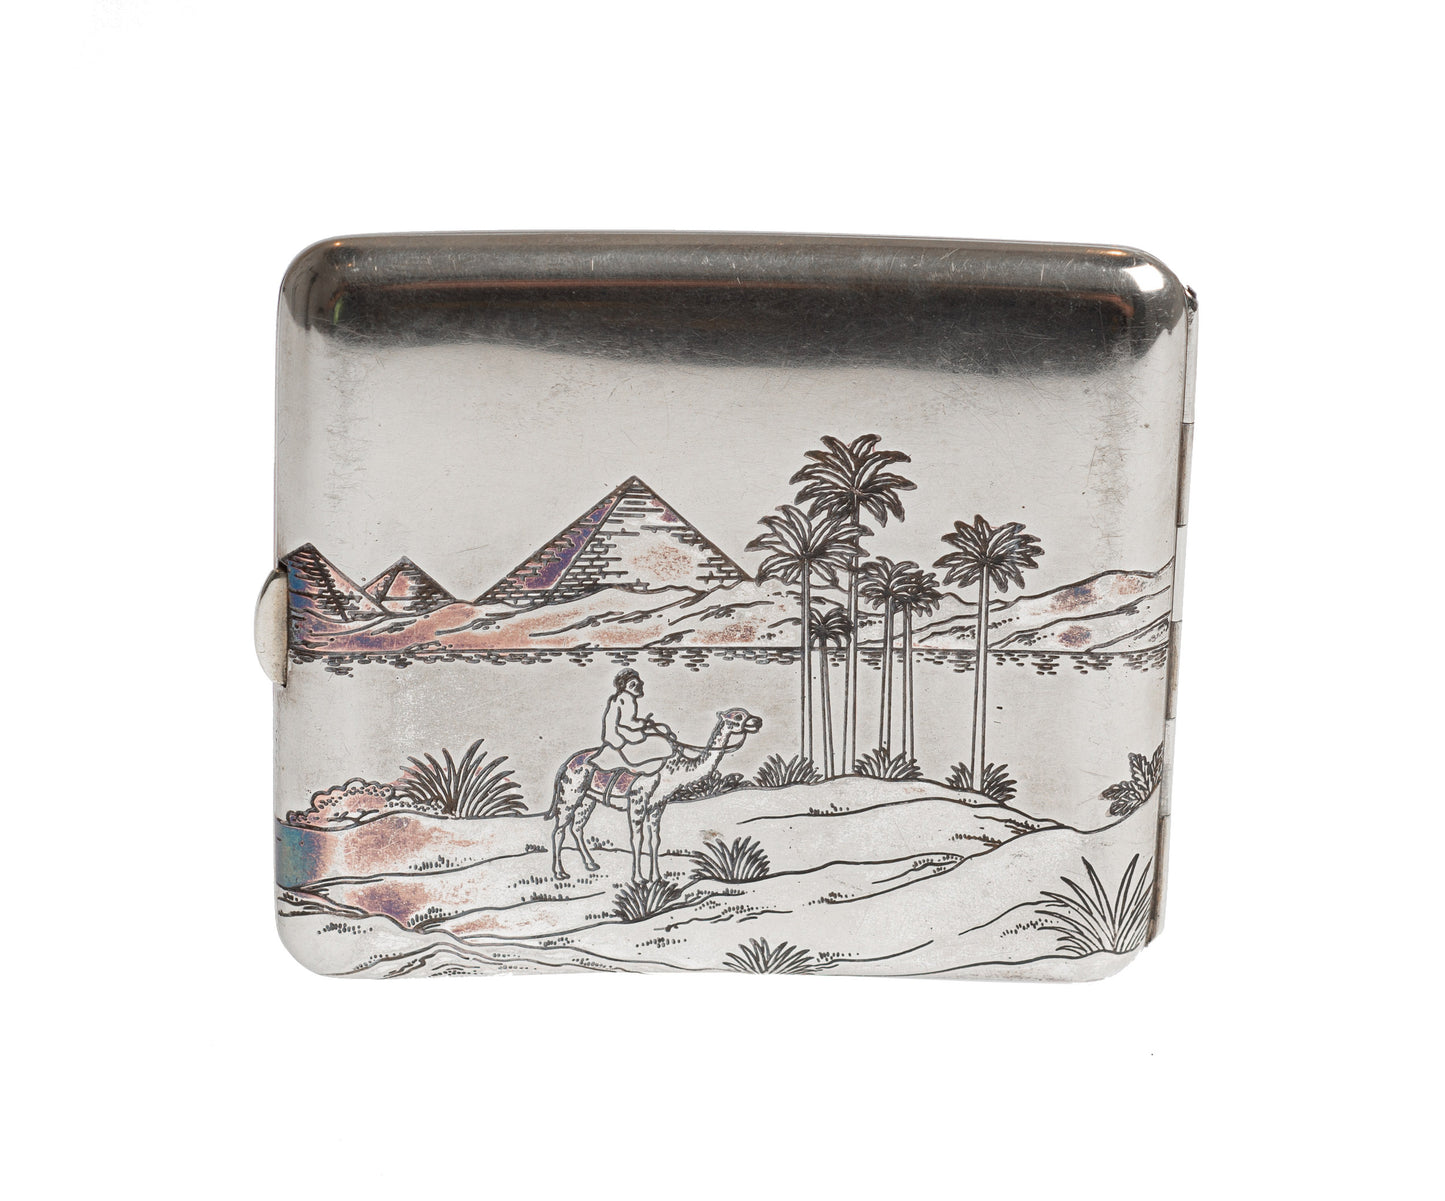 Egyptian Silver Damascene Copper Antique Cigarette Case with Pyramids & Camels (Code 2328)